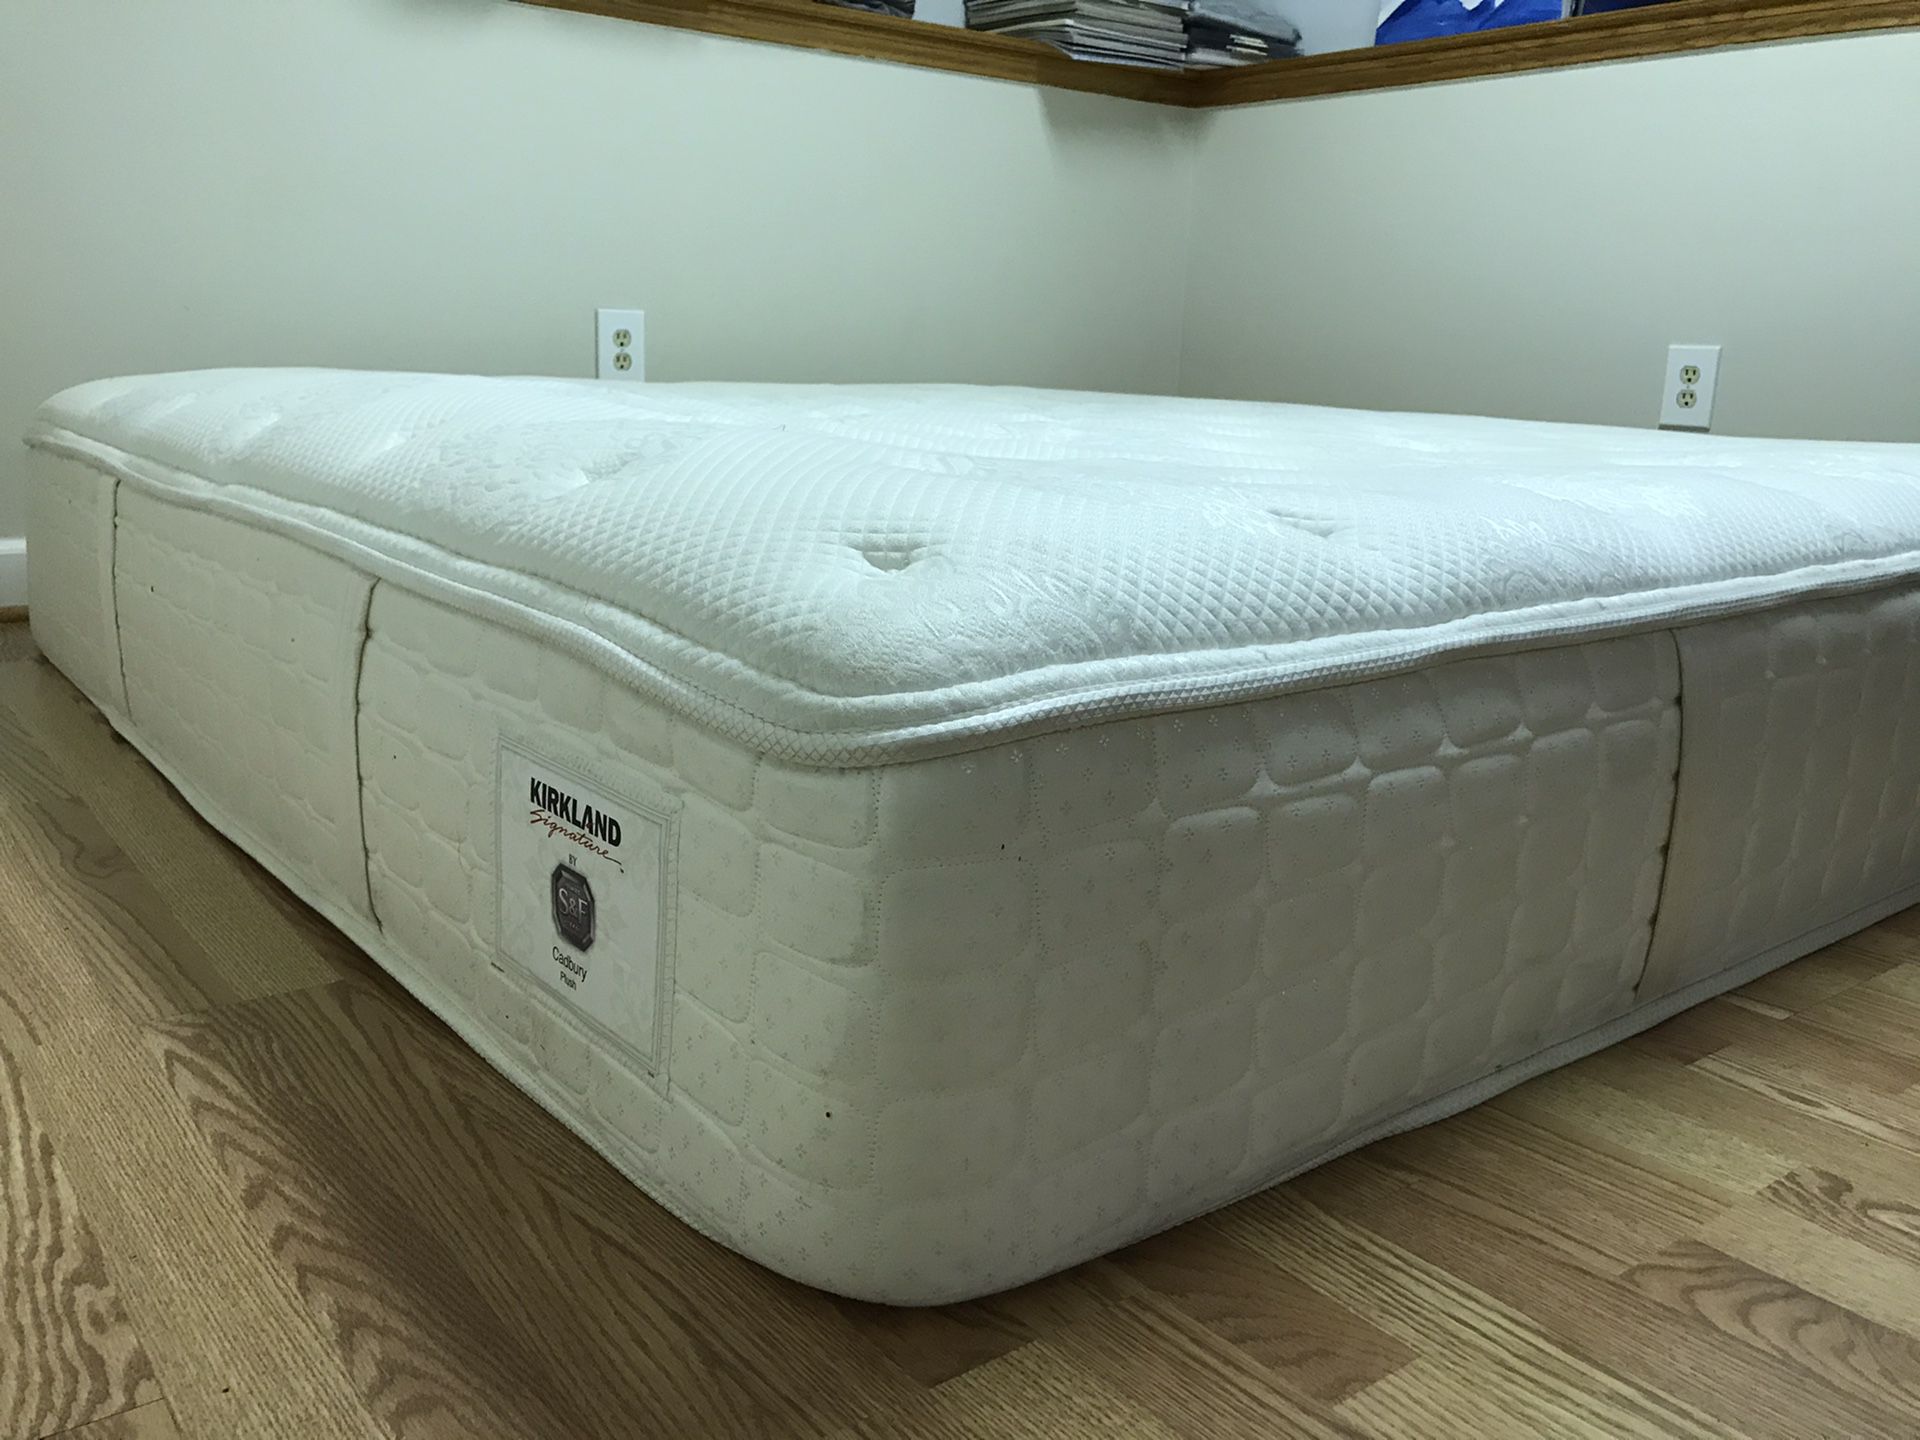 Sterns and Foster king mattress from Costco